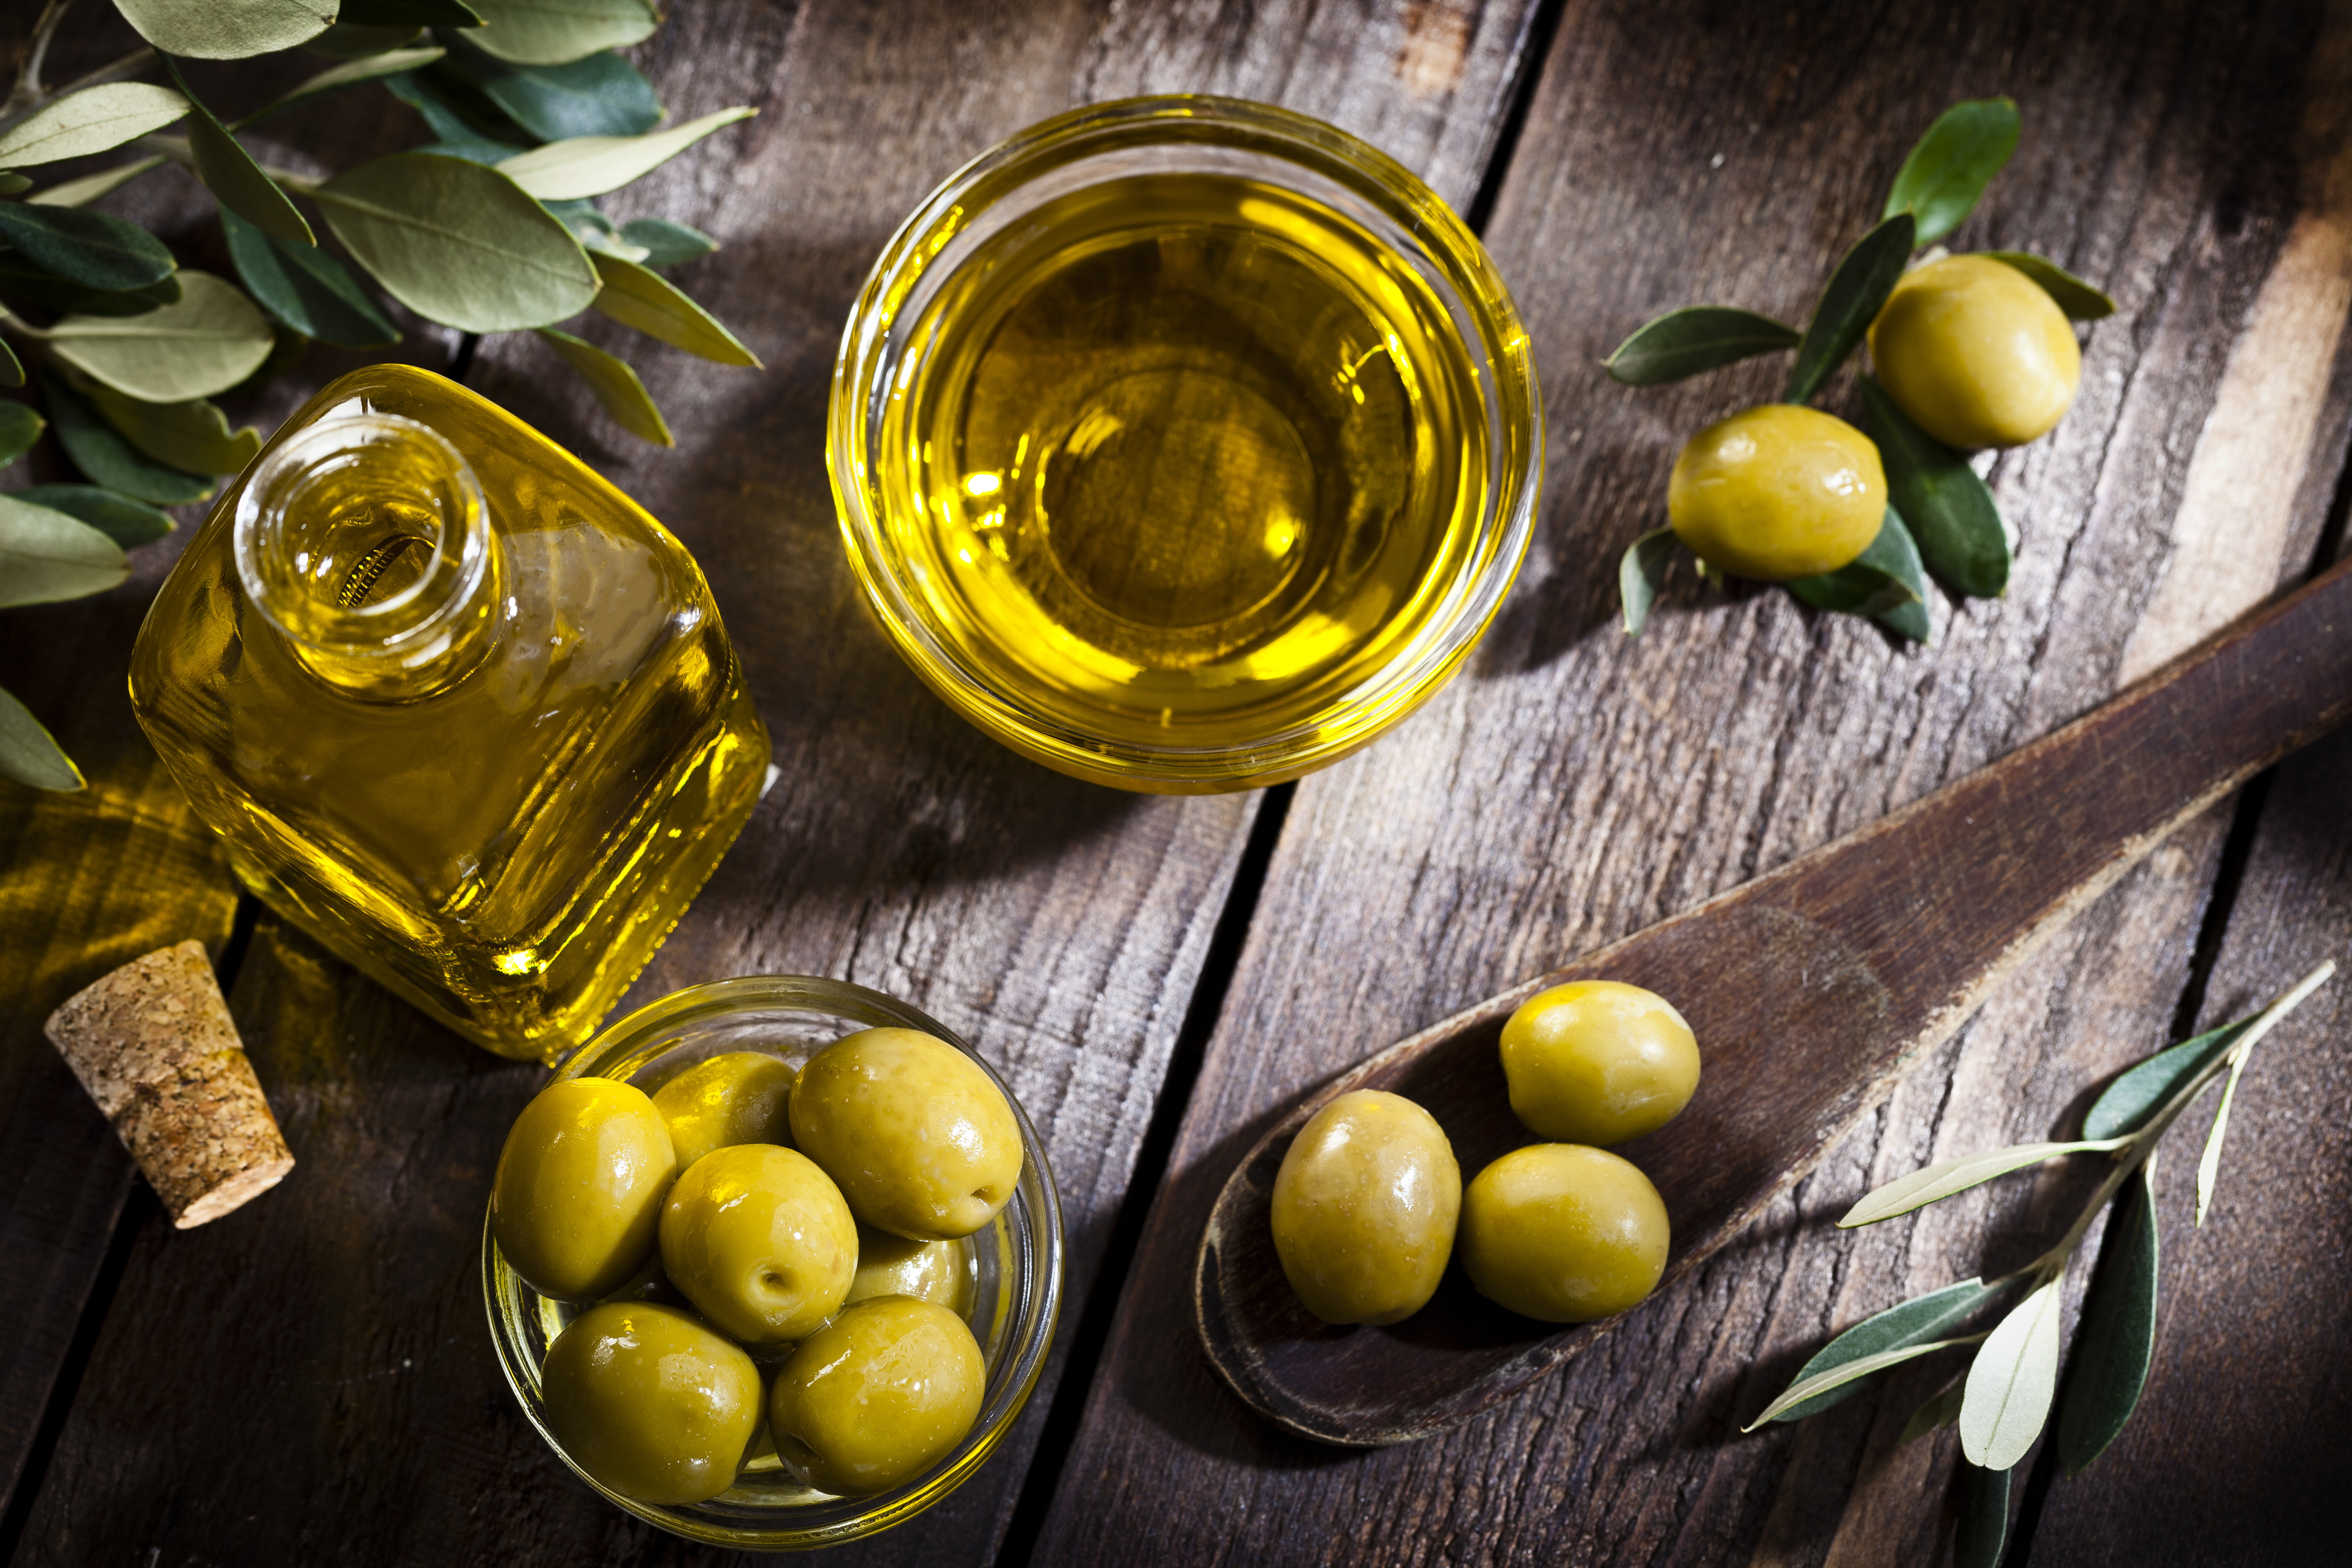 Does Olive Oil Make You Fat?